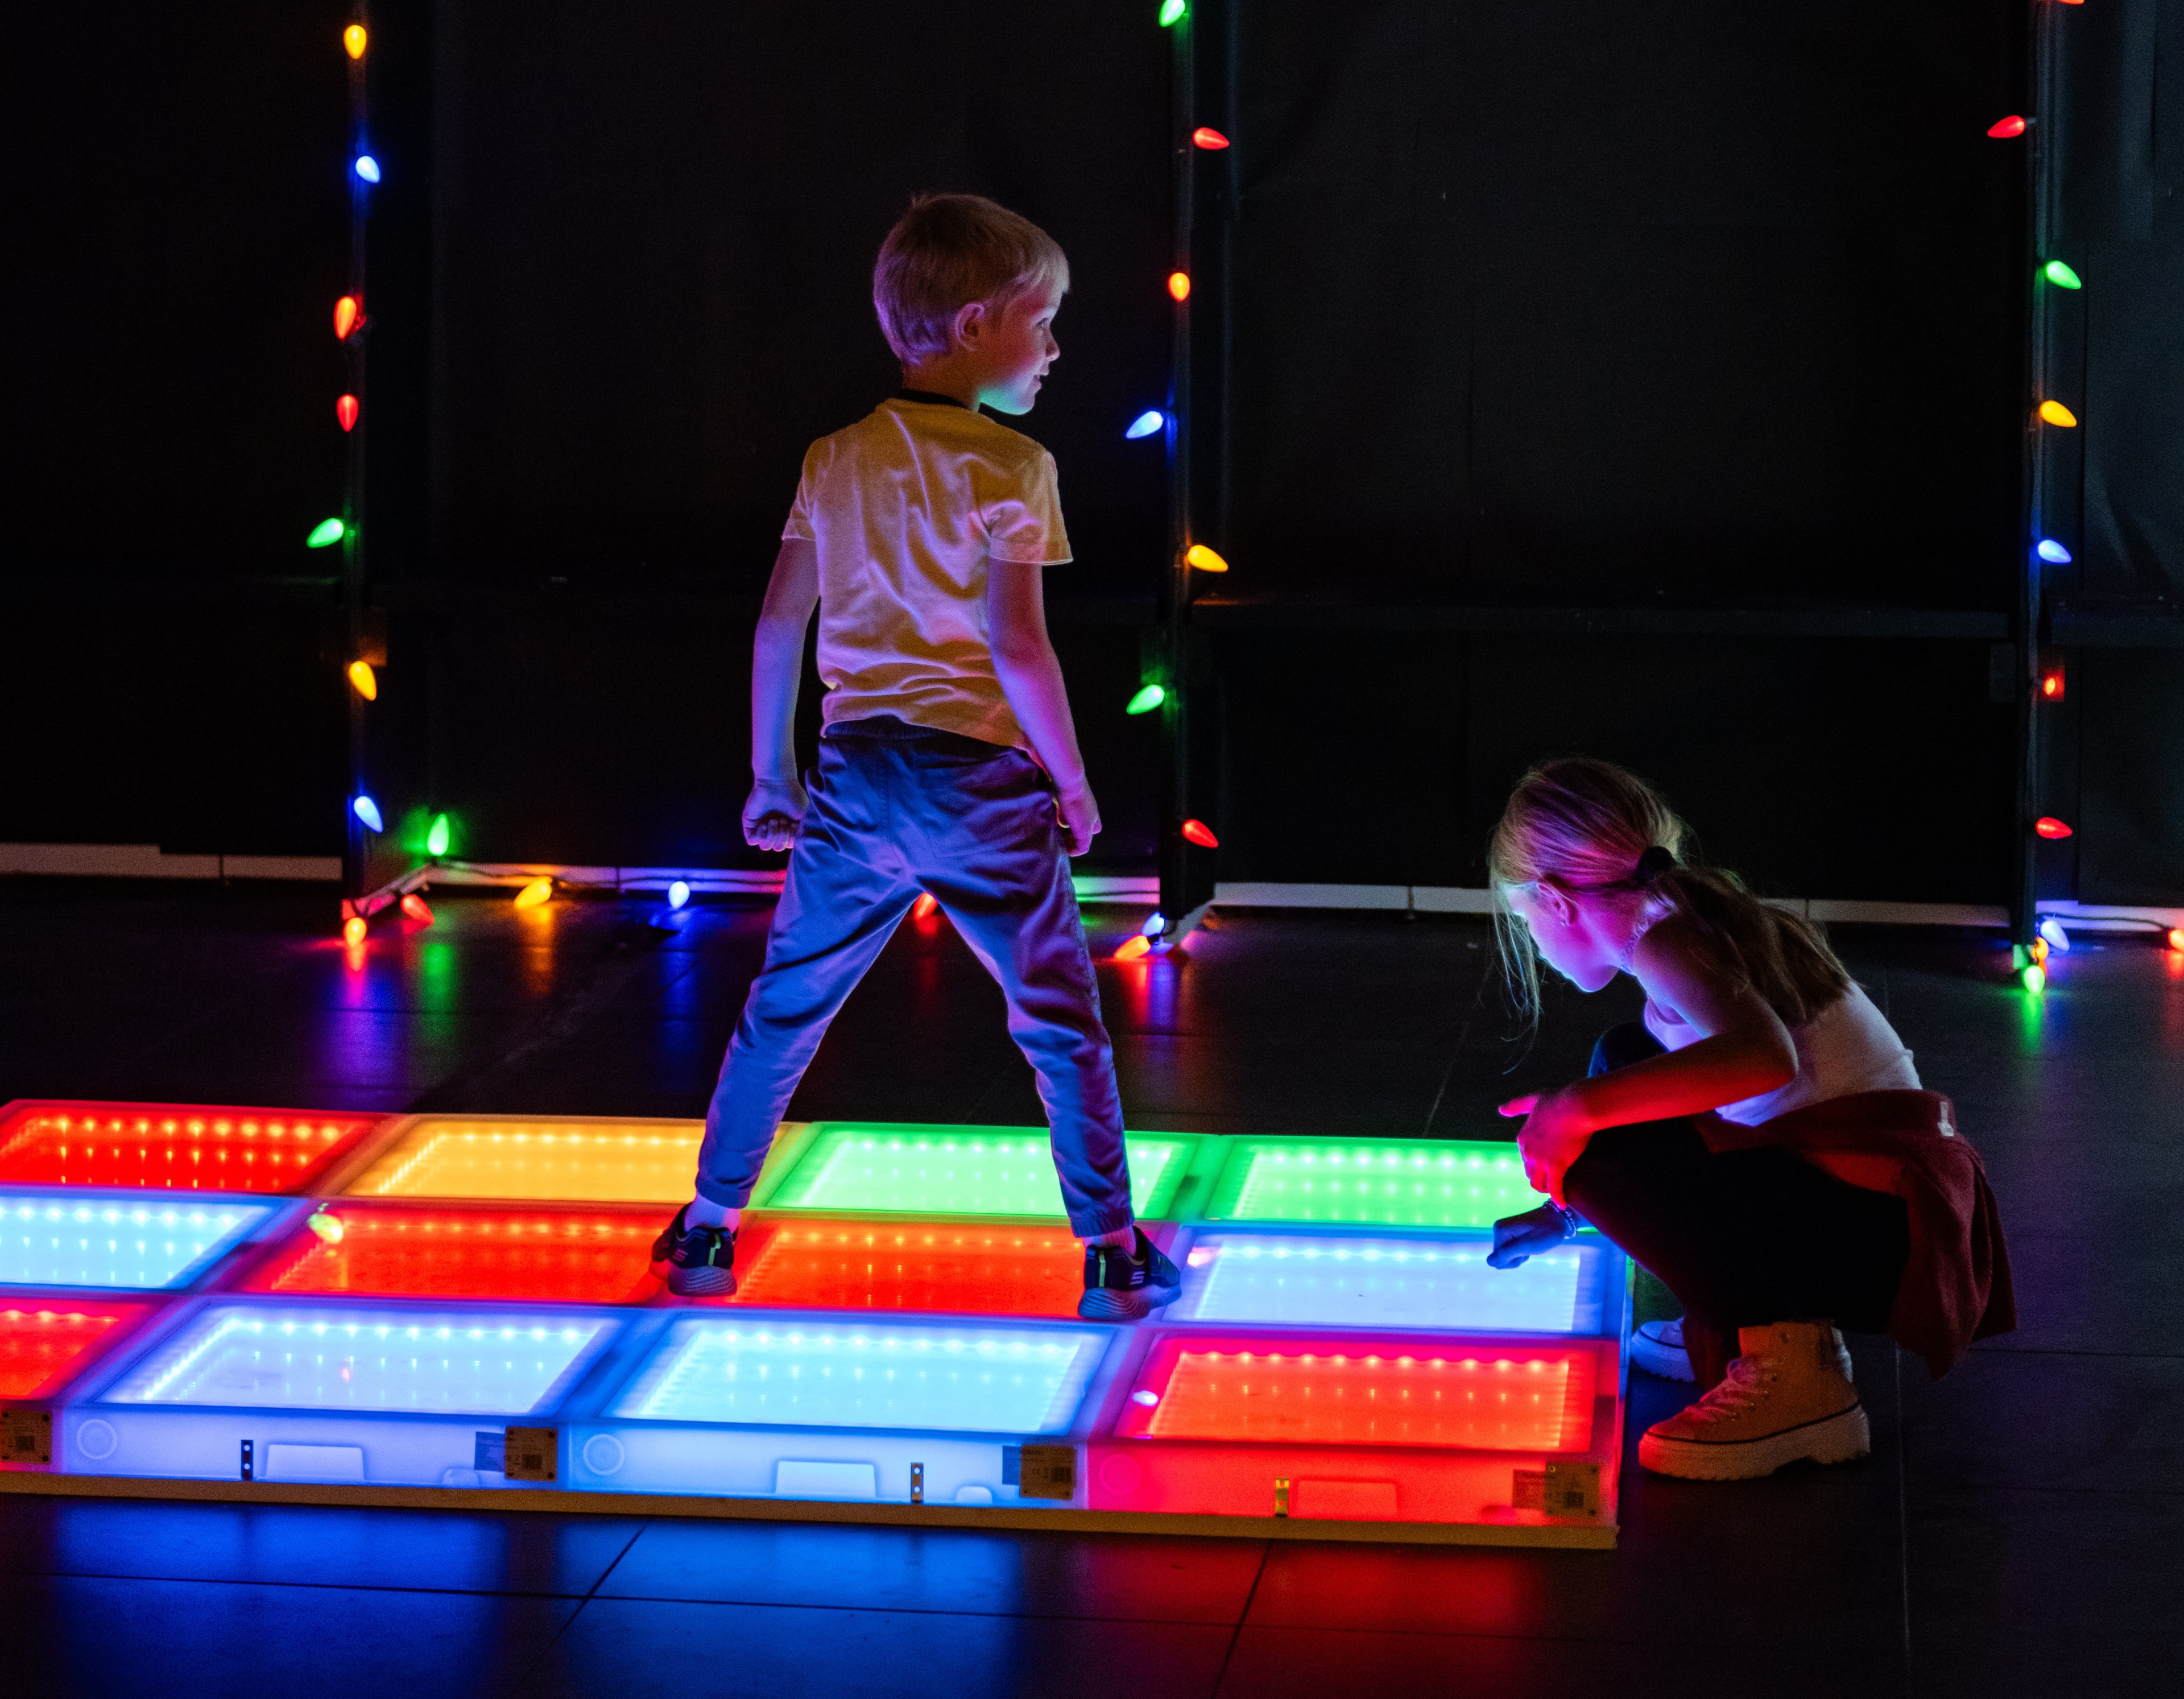 A little boy and girl play with an rainbow LED dance floor in a dark room decorated with lights for the holidays. 